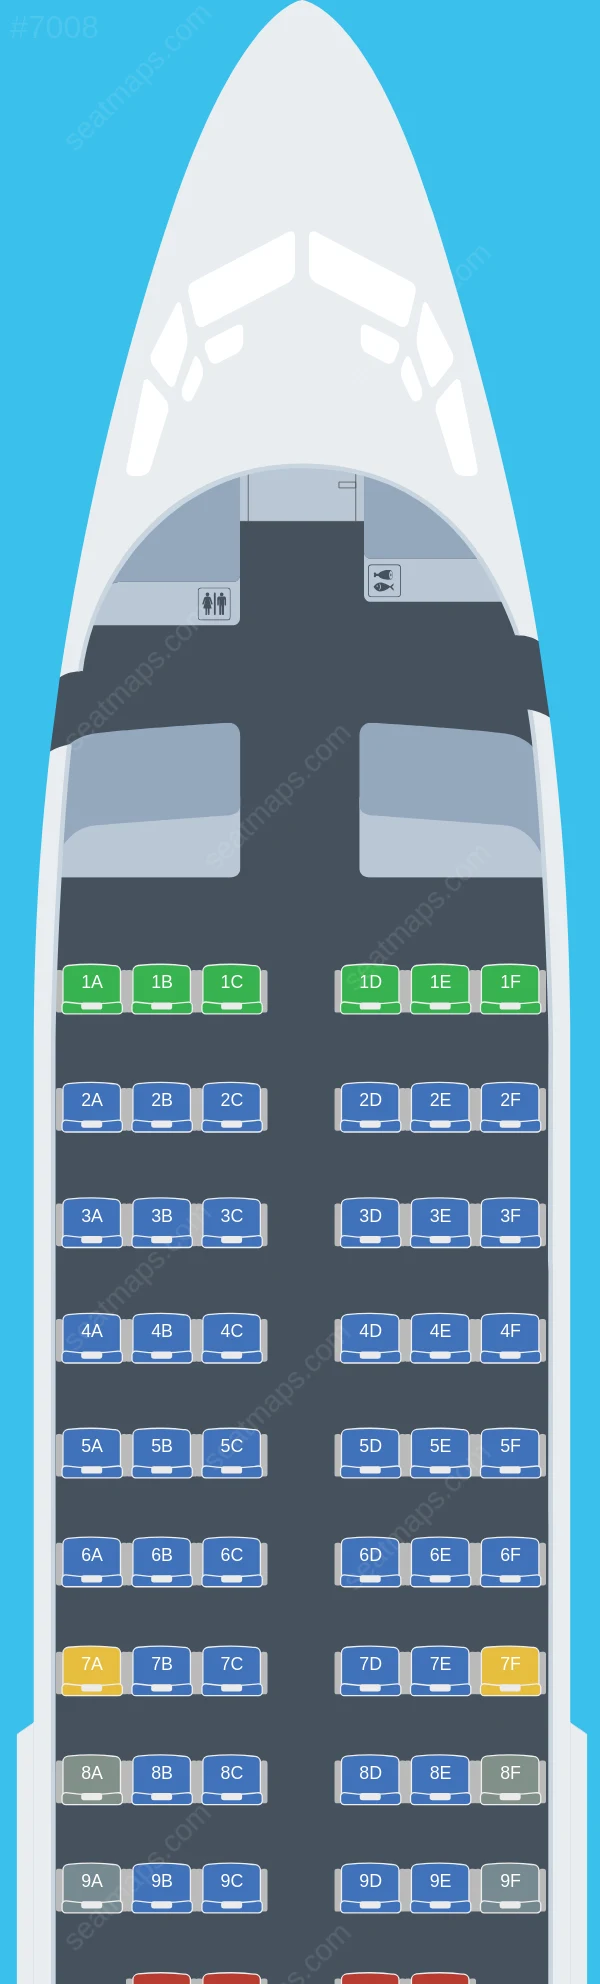 Lucky Air Boeing 737-700 V.4 seatmap preview